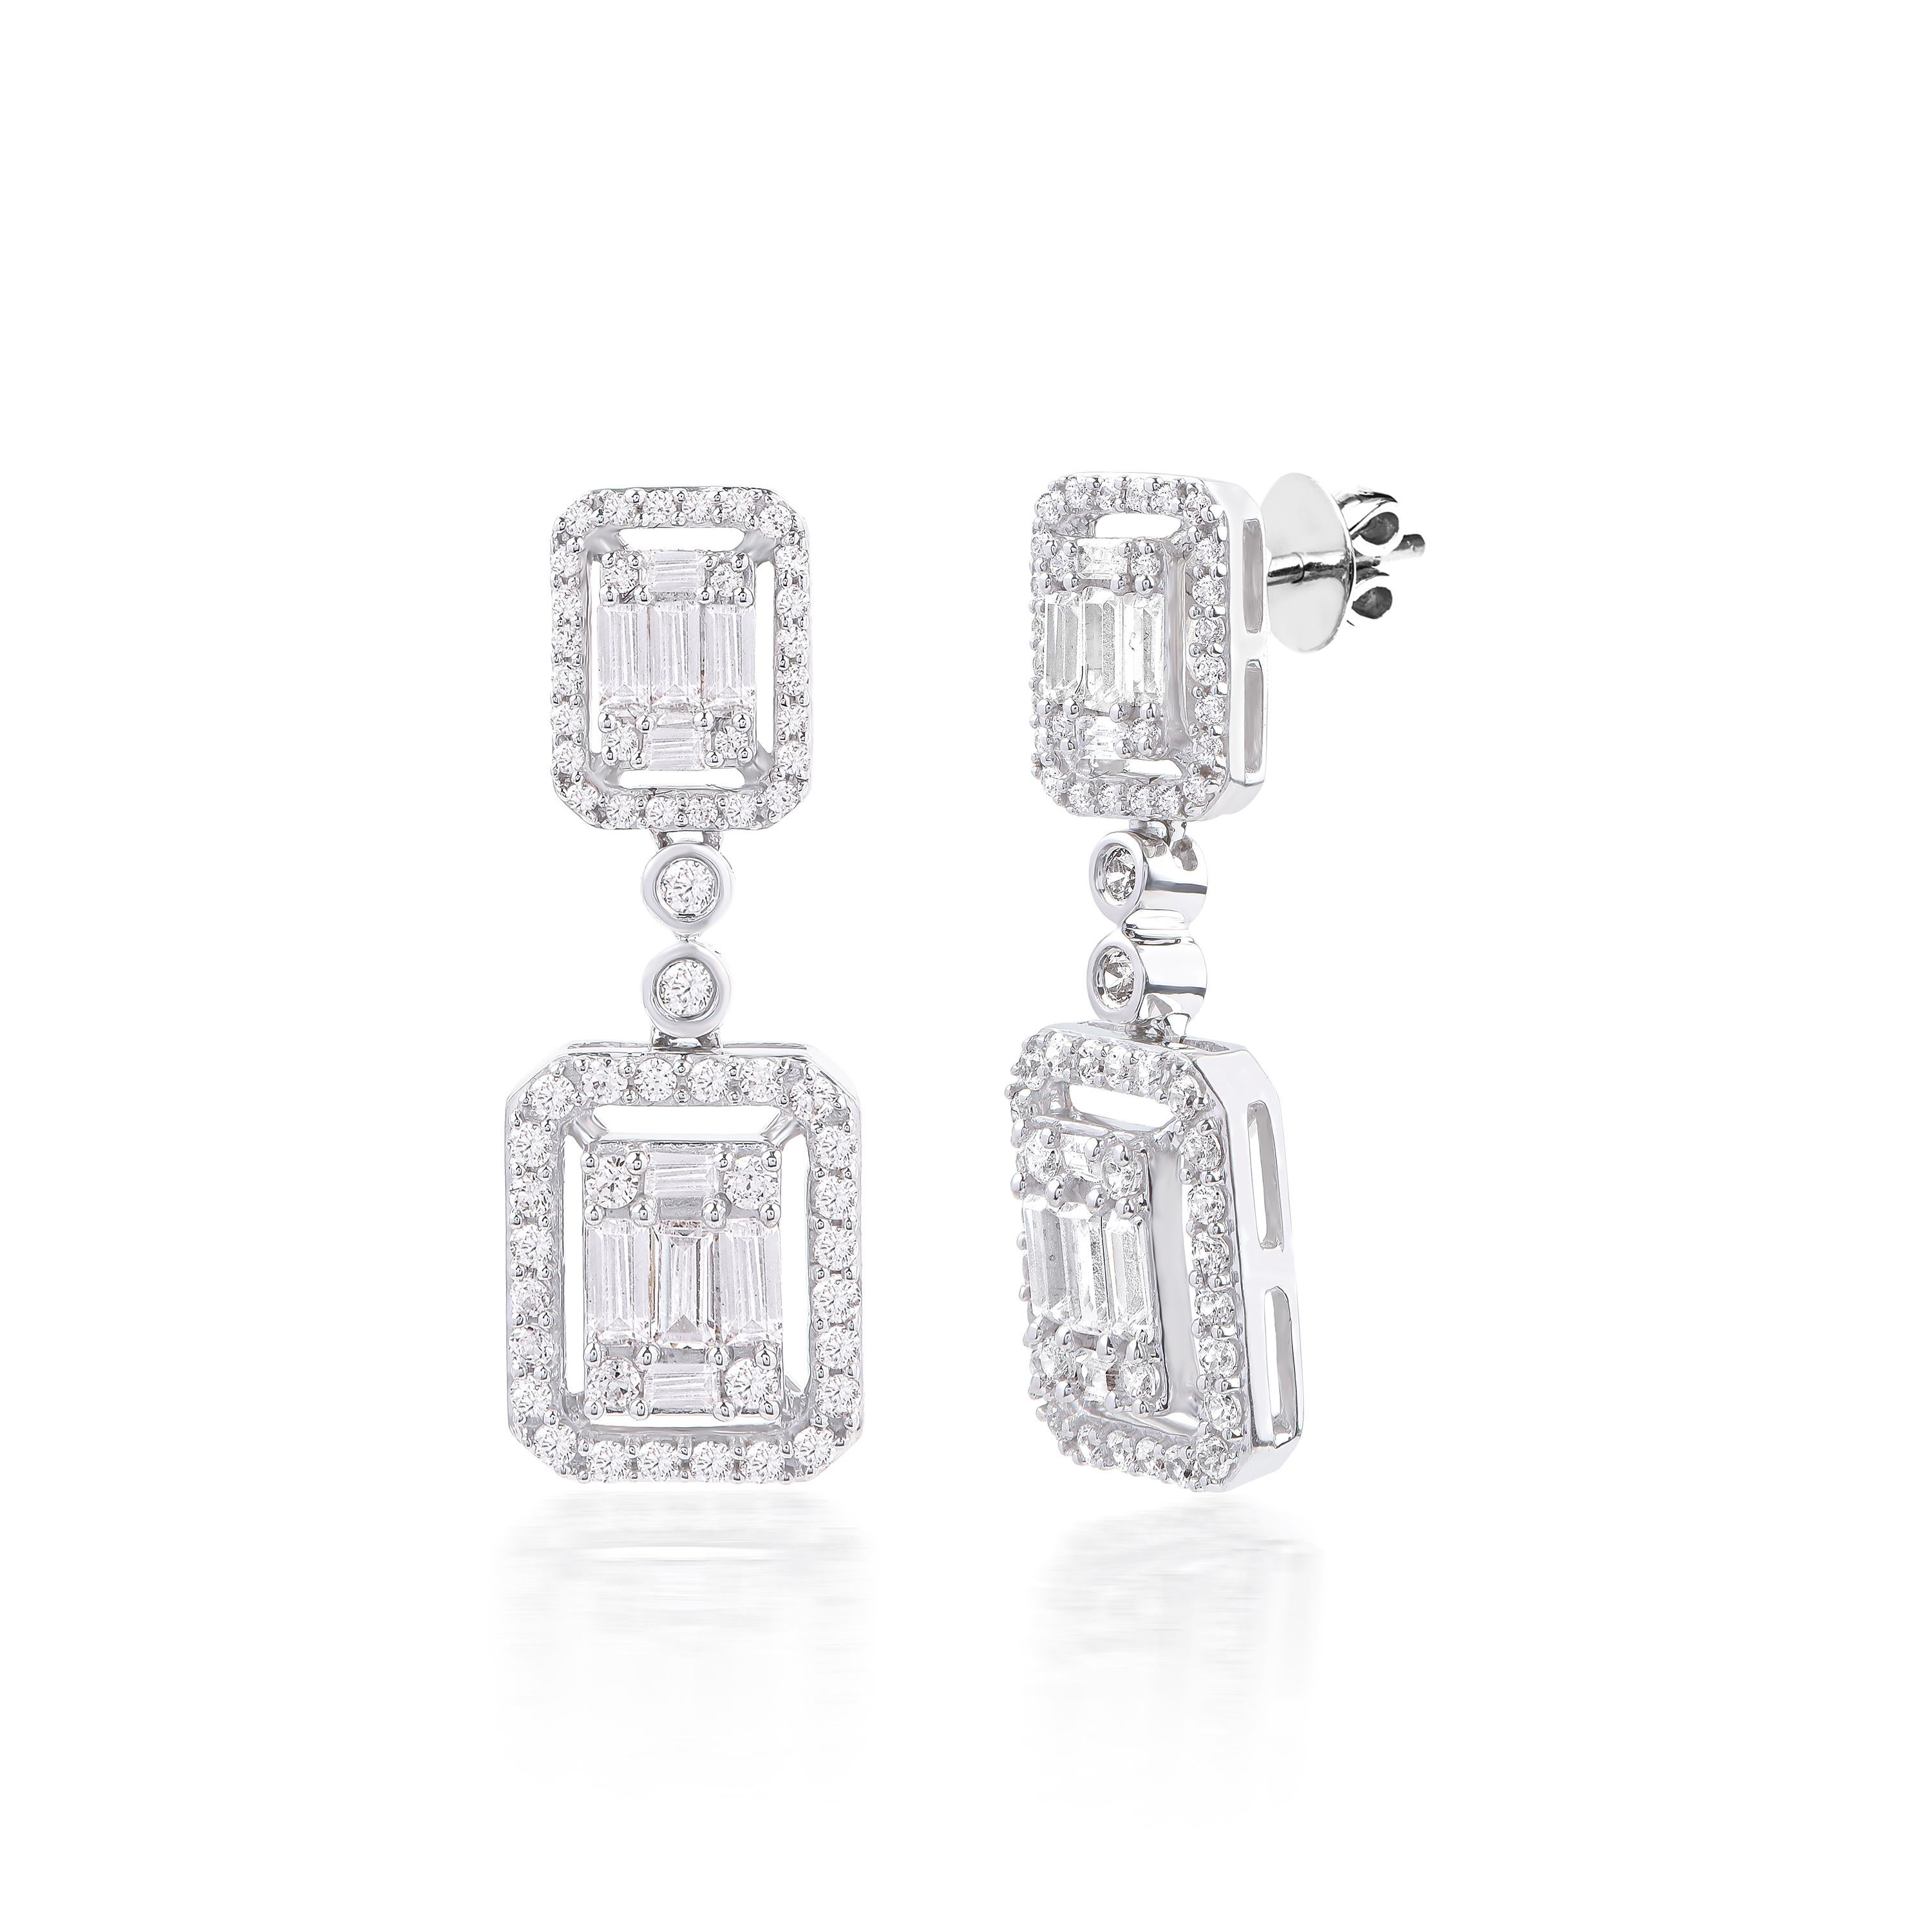 Embedded with 116 brilliant-cut diamonds and 20 Baguette diamonds in prong and bezel setting and designed in 14-karat white gold. The diamonds are graded H-I Color, I2 Clarity. 

We can customized these earrings in yellow or rose gold as well.